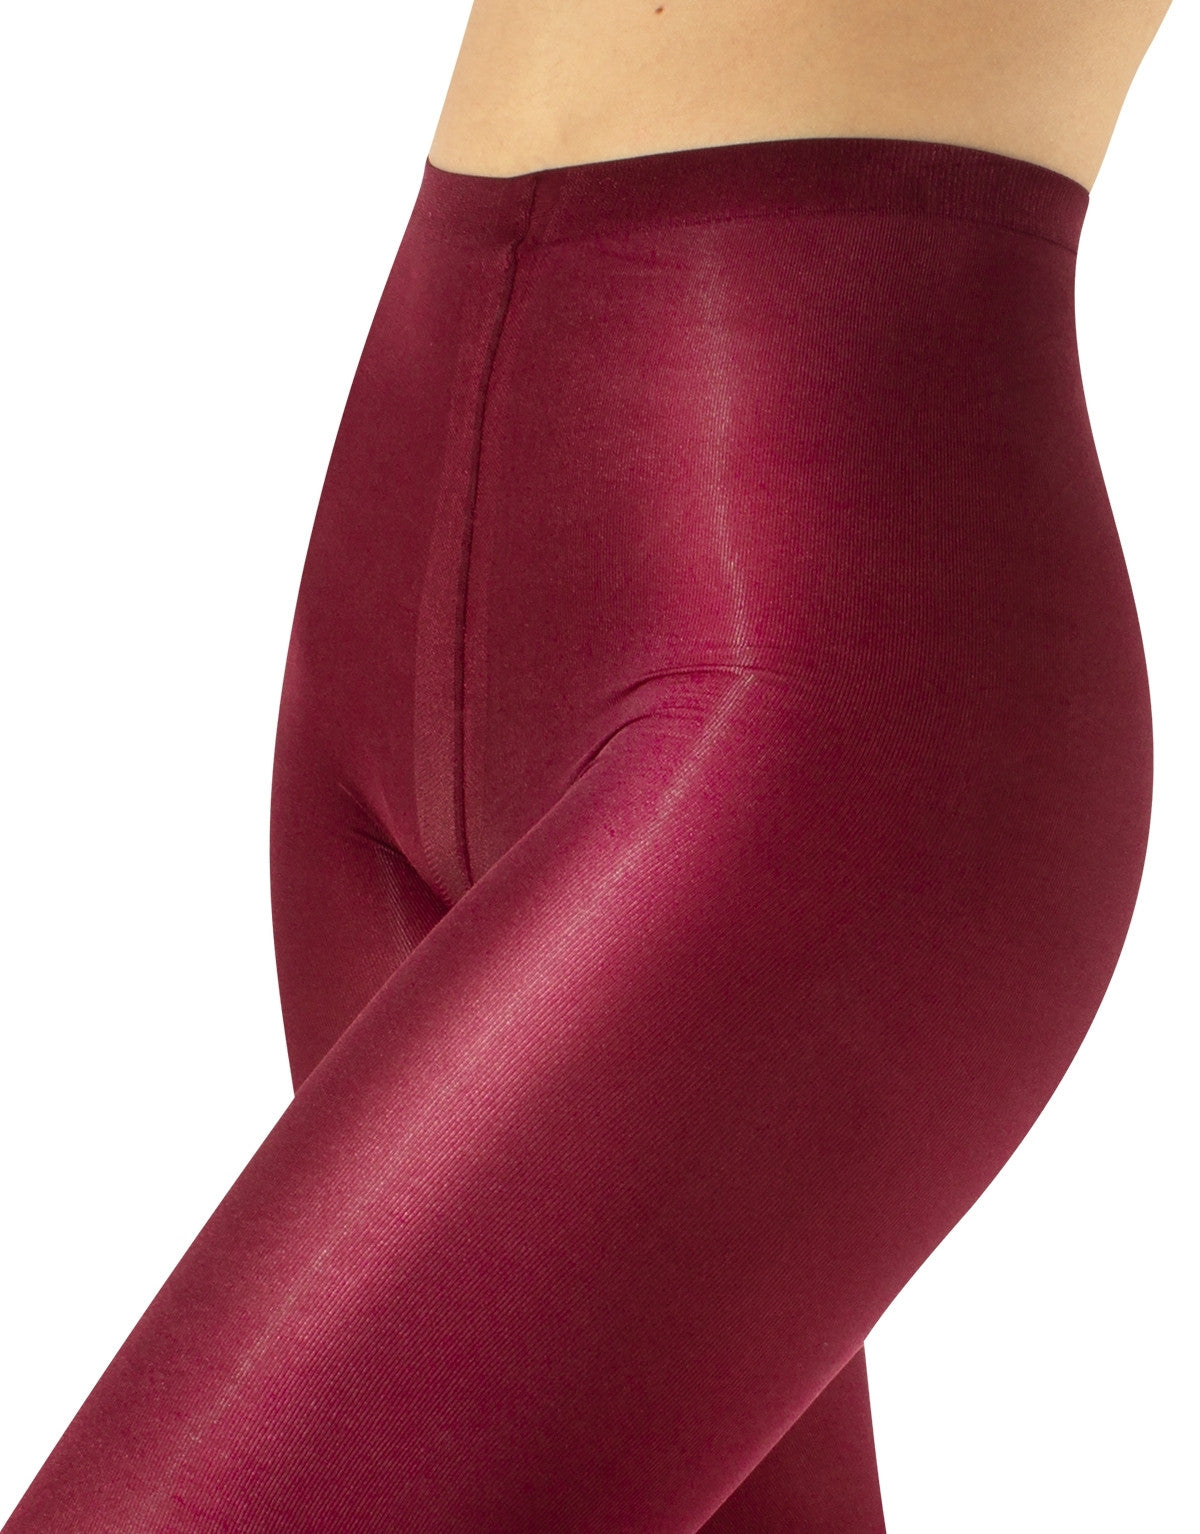 Calzitaly Glossy Tights - Wine ultra opaque tights with a shiny satin finish.